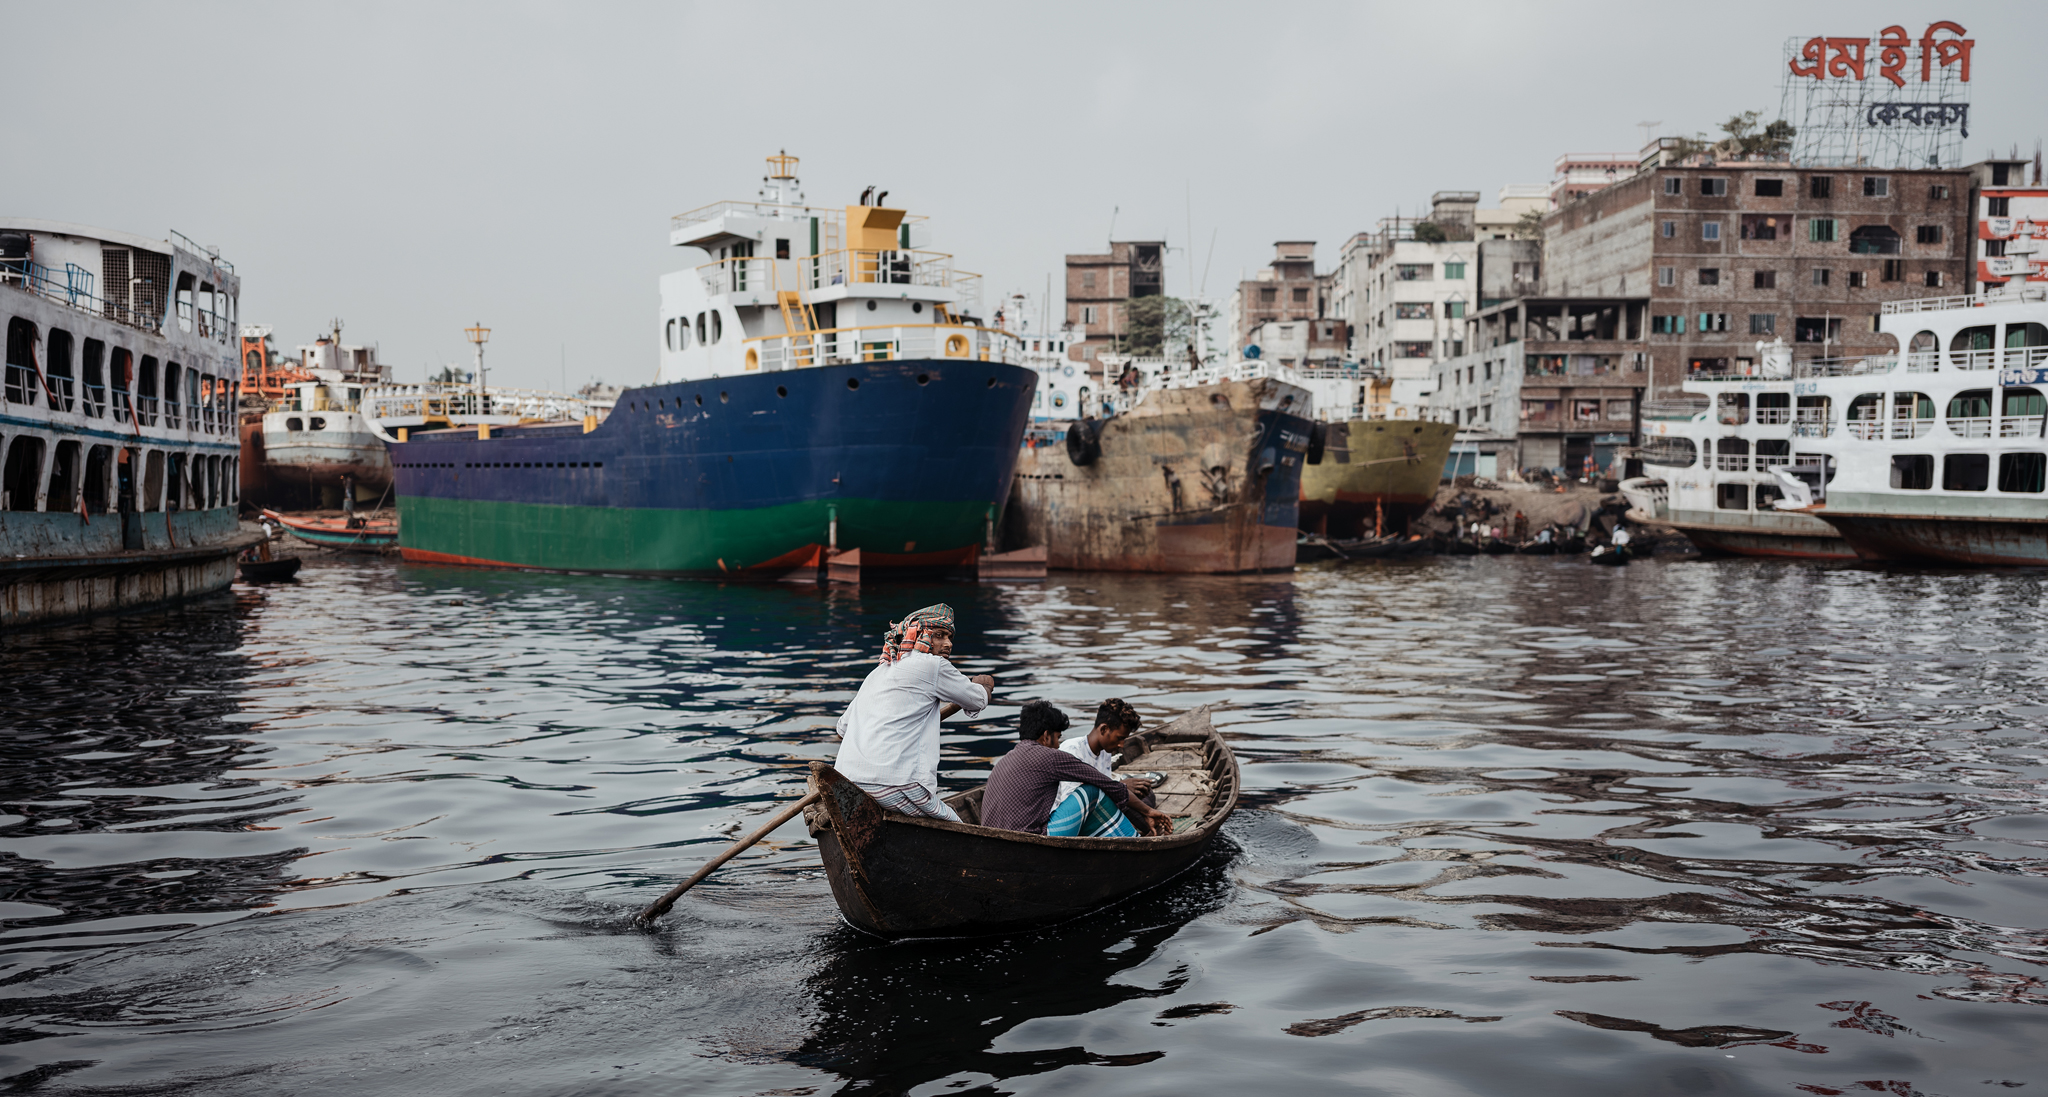 The Buriganga river is an important connection between the city of Dhaka and the surrounding villages. Many people travel by boat or ferry to the city to work, earn money and then bring it back to their familiy in the village. 